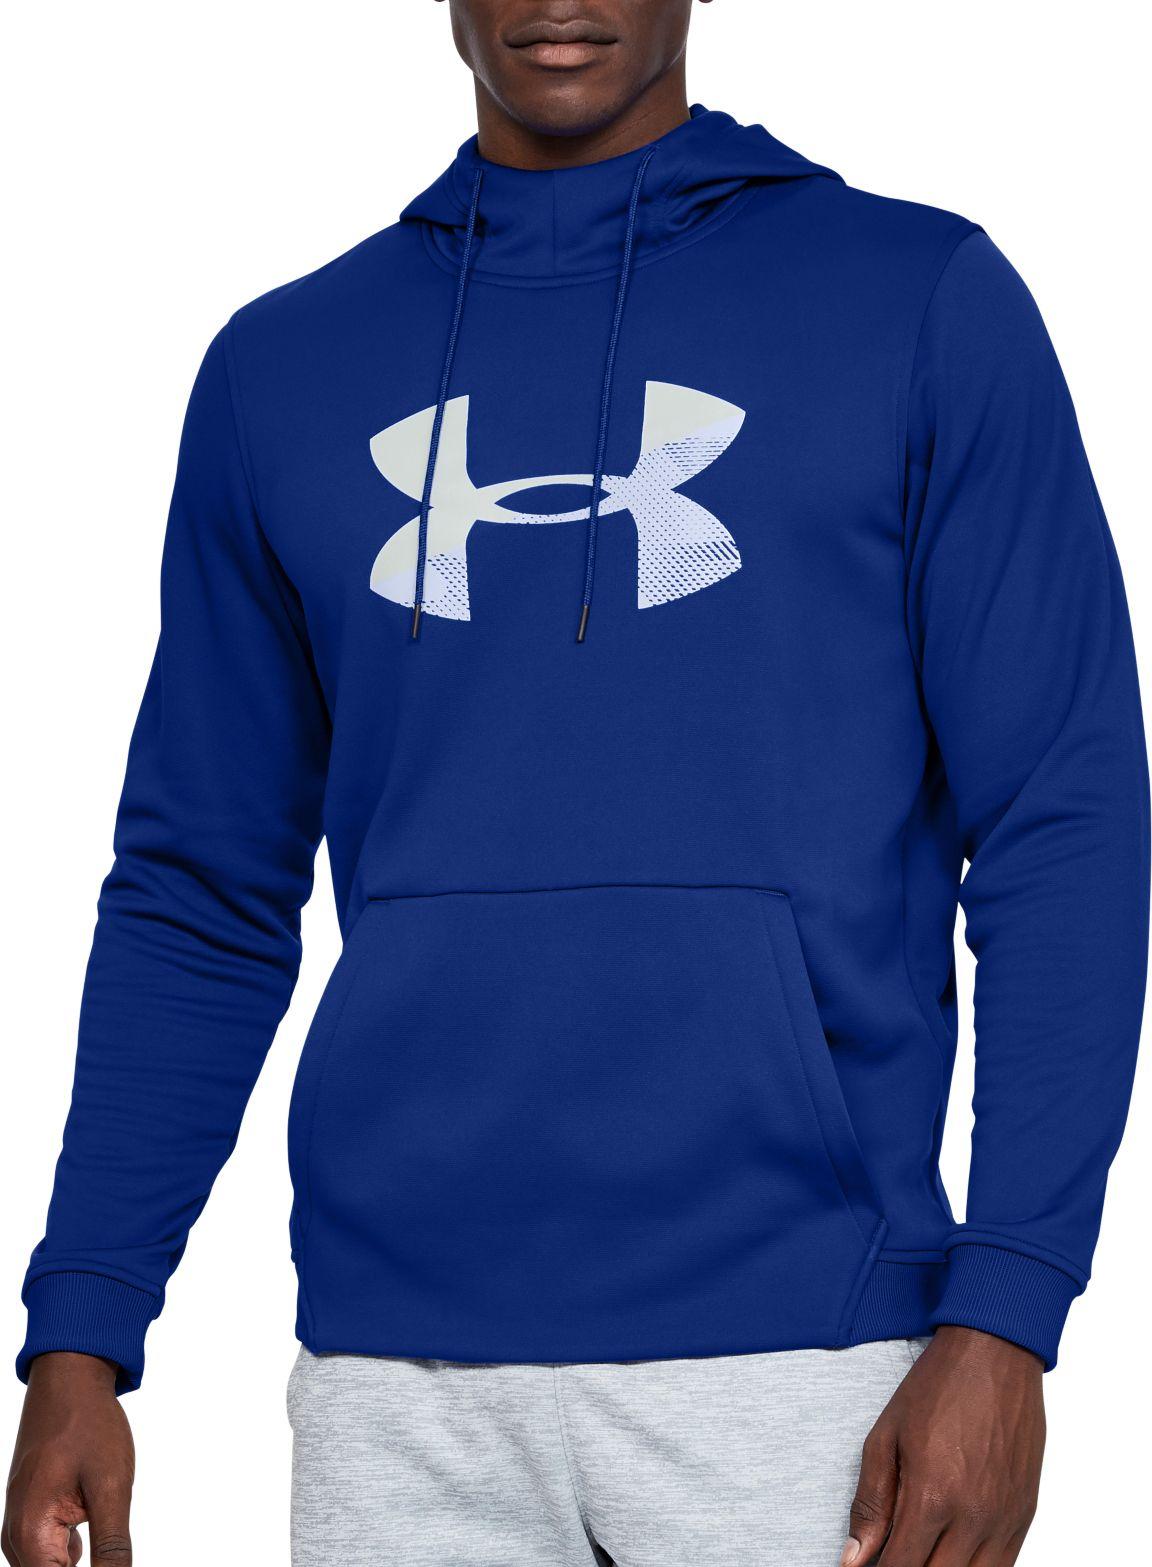 Under Armour Armour Fleece Big Logo Graphic Hoodie in Blue for Men - Lyst